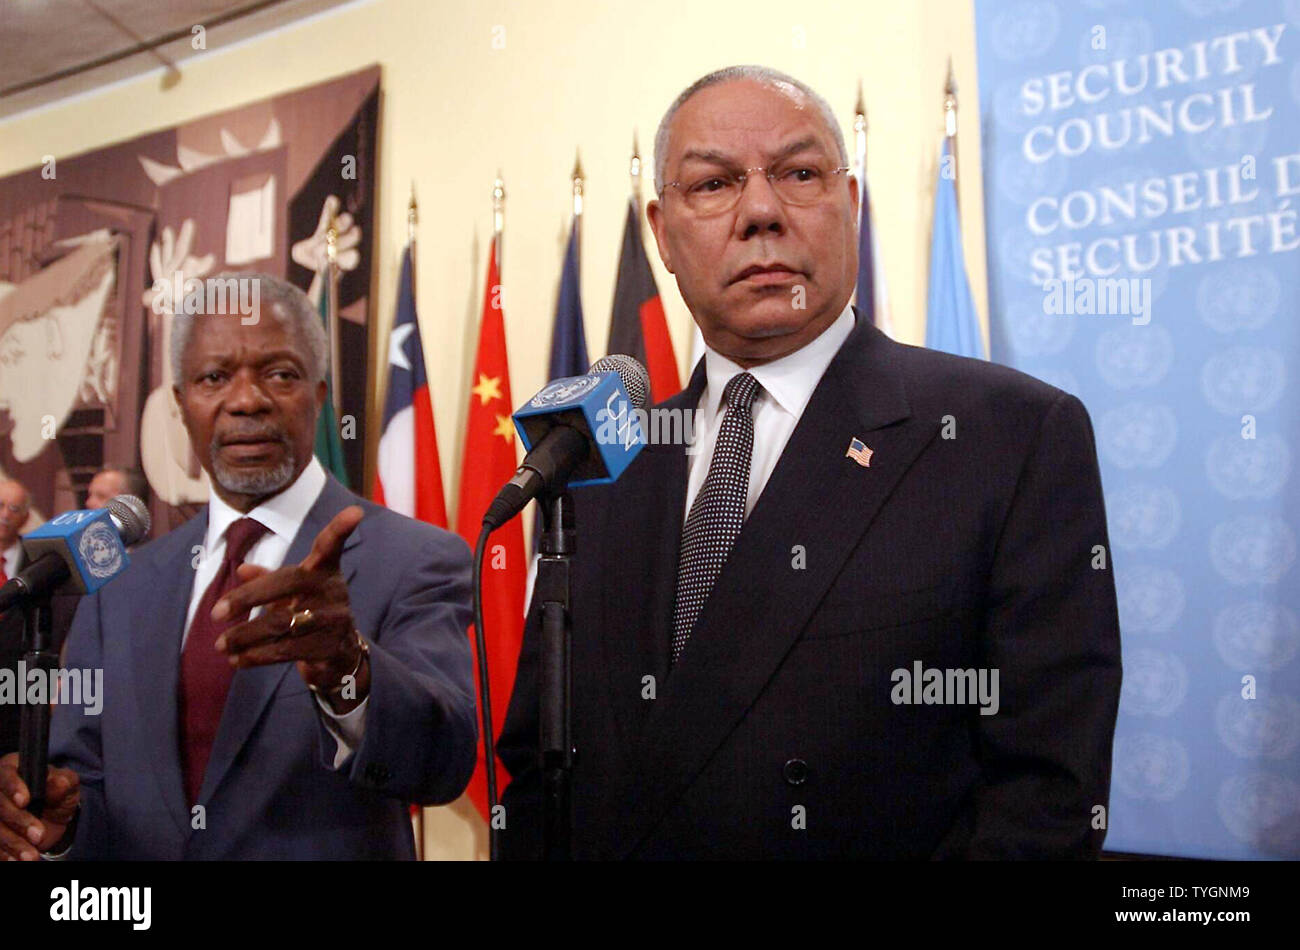 UN Secretary General Kofi Annan and US Secretary of State Colin Powell (right) meet for consulations and a joint press conference on July 22, 2004 on efforts to aid Sudan (UPI Photo/Ezio Petersen) Stock Photo